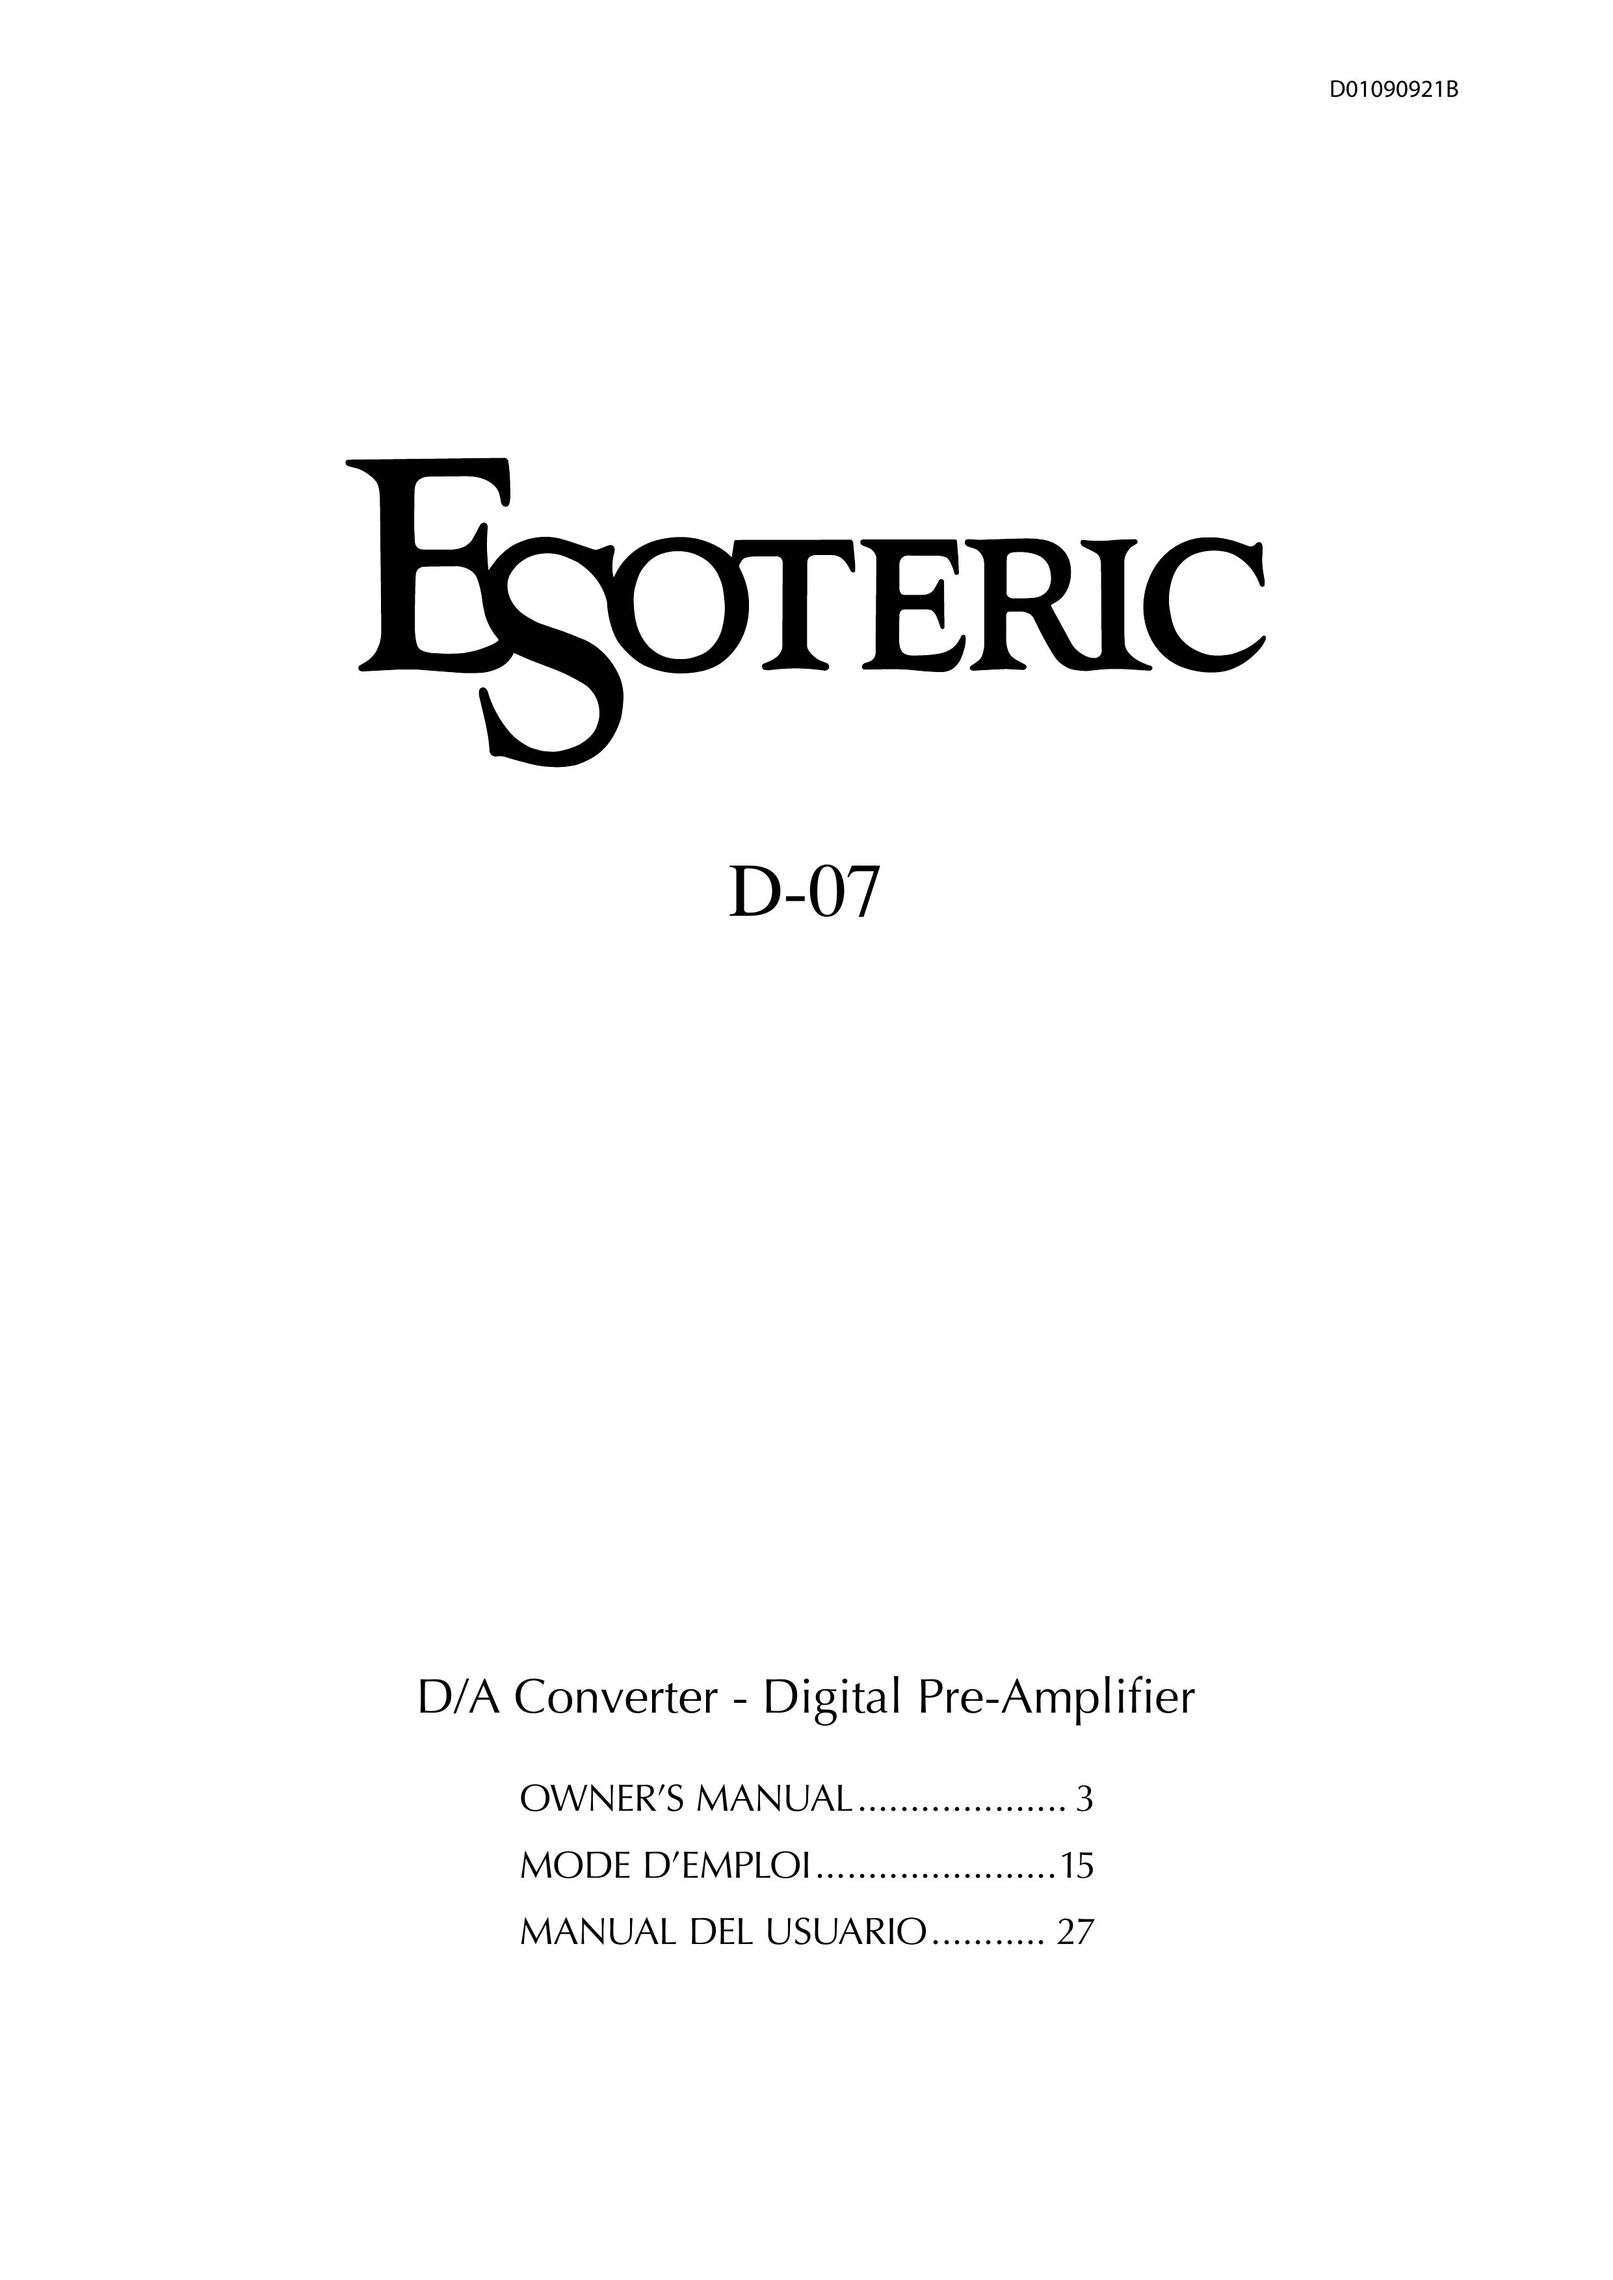 Esoteric D-07 Stereo Amplifier User Manual